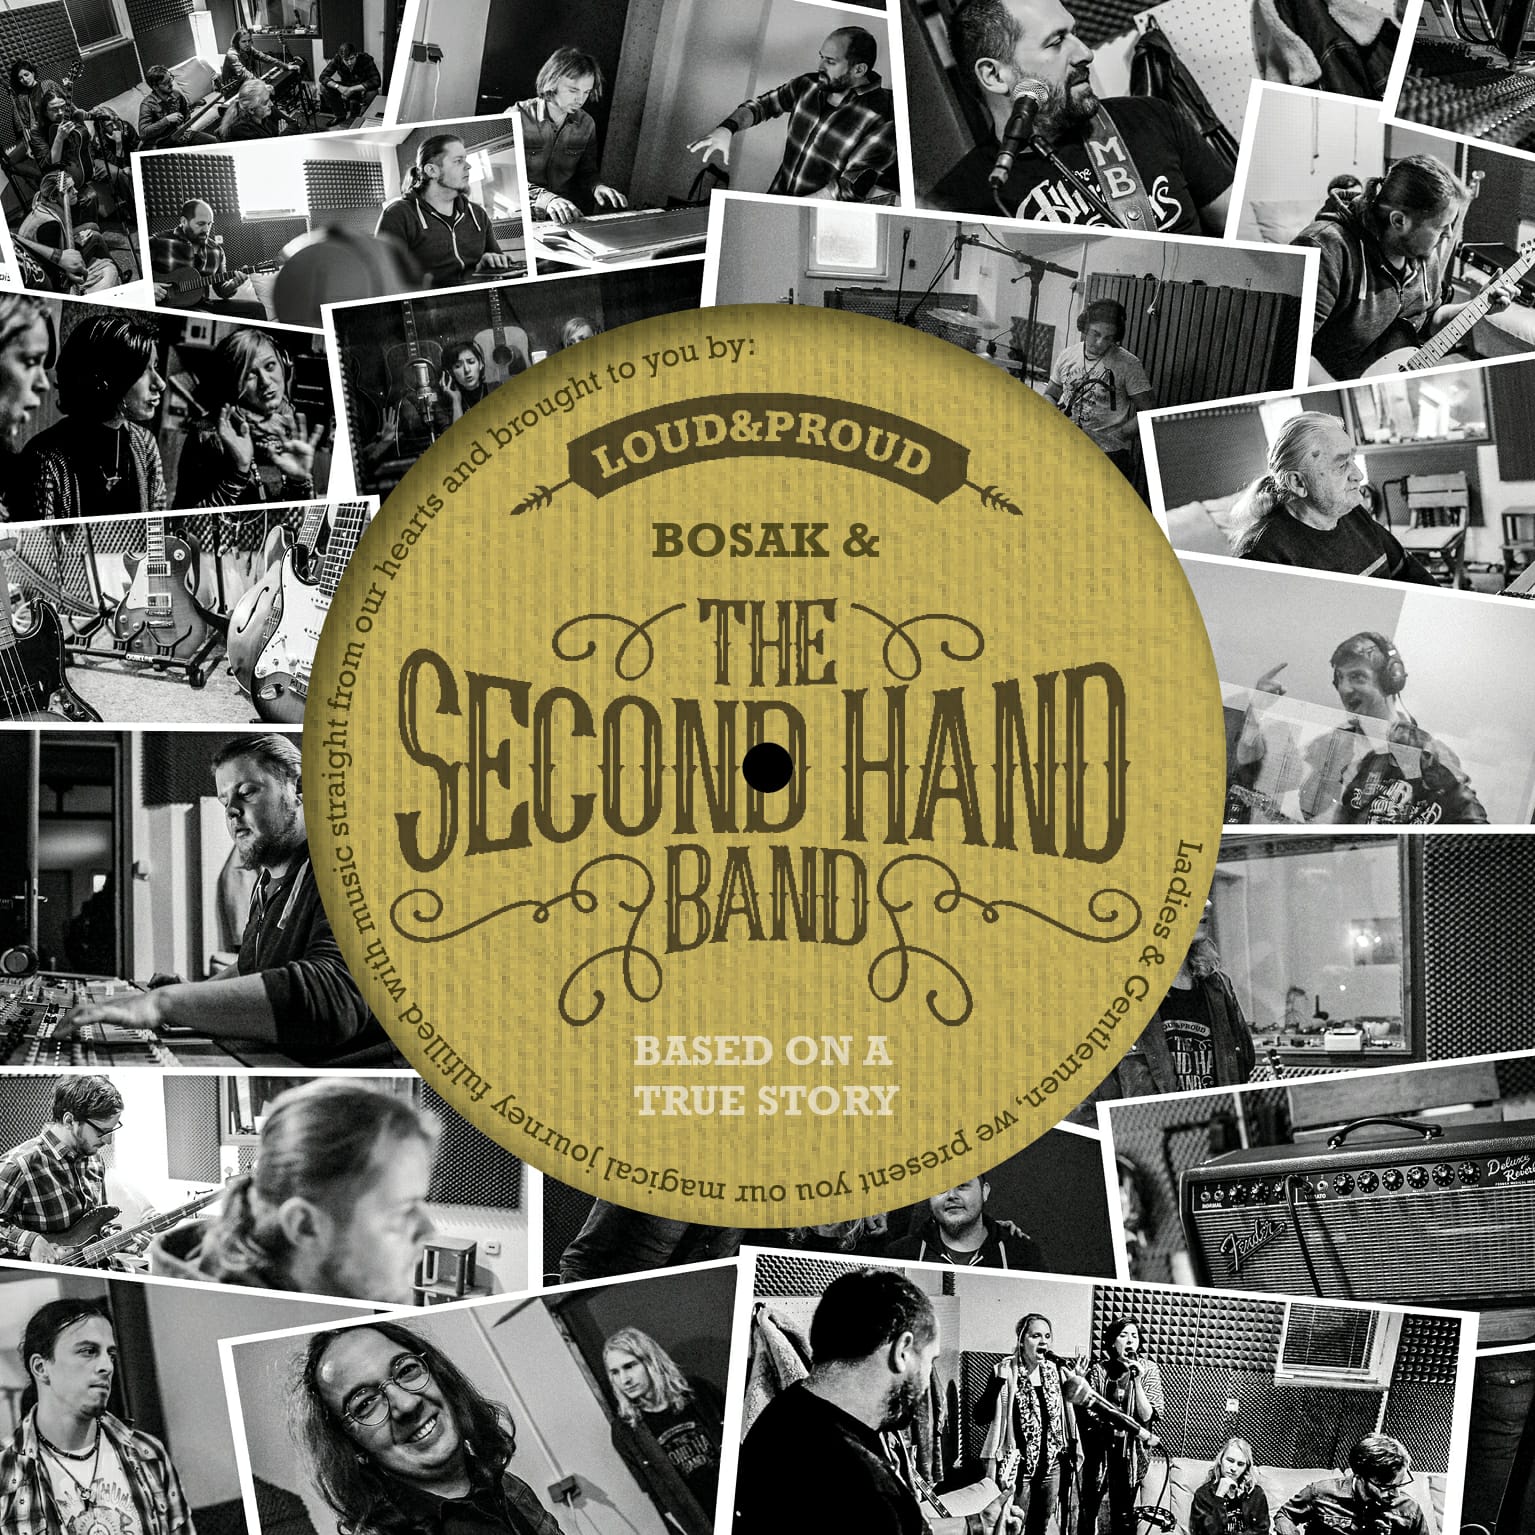 Bosak & The Second Hand Band - Based on a true story - album